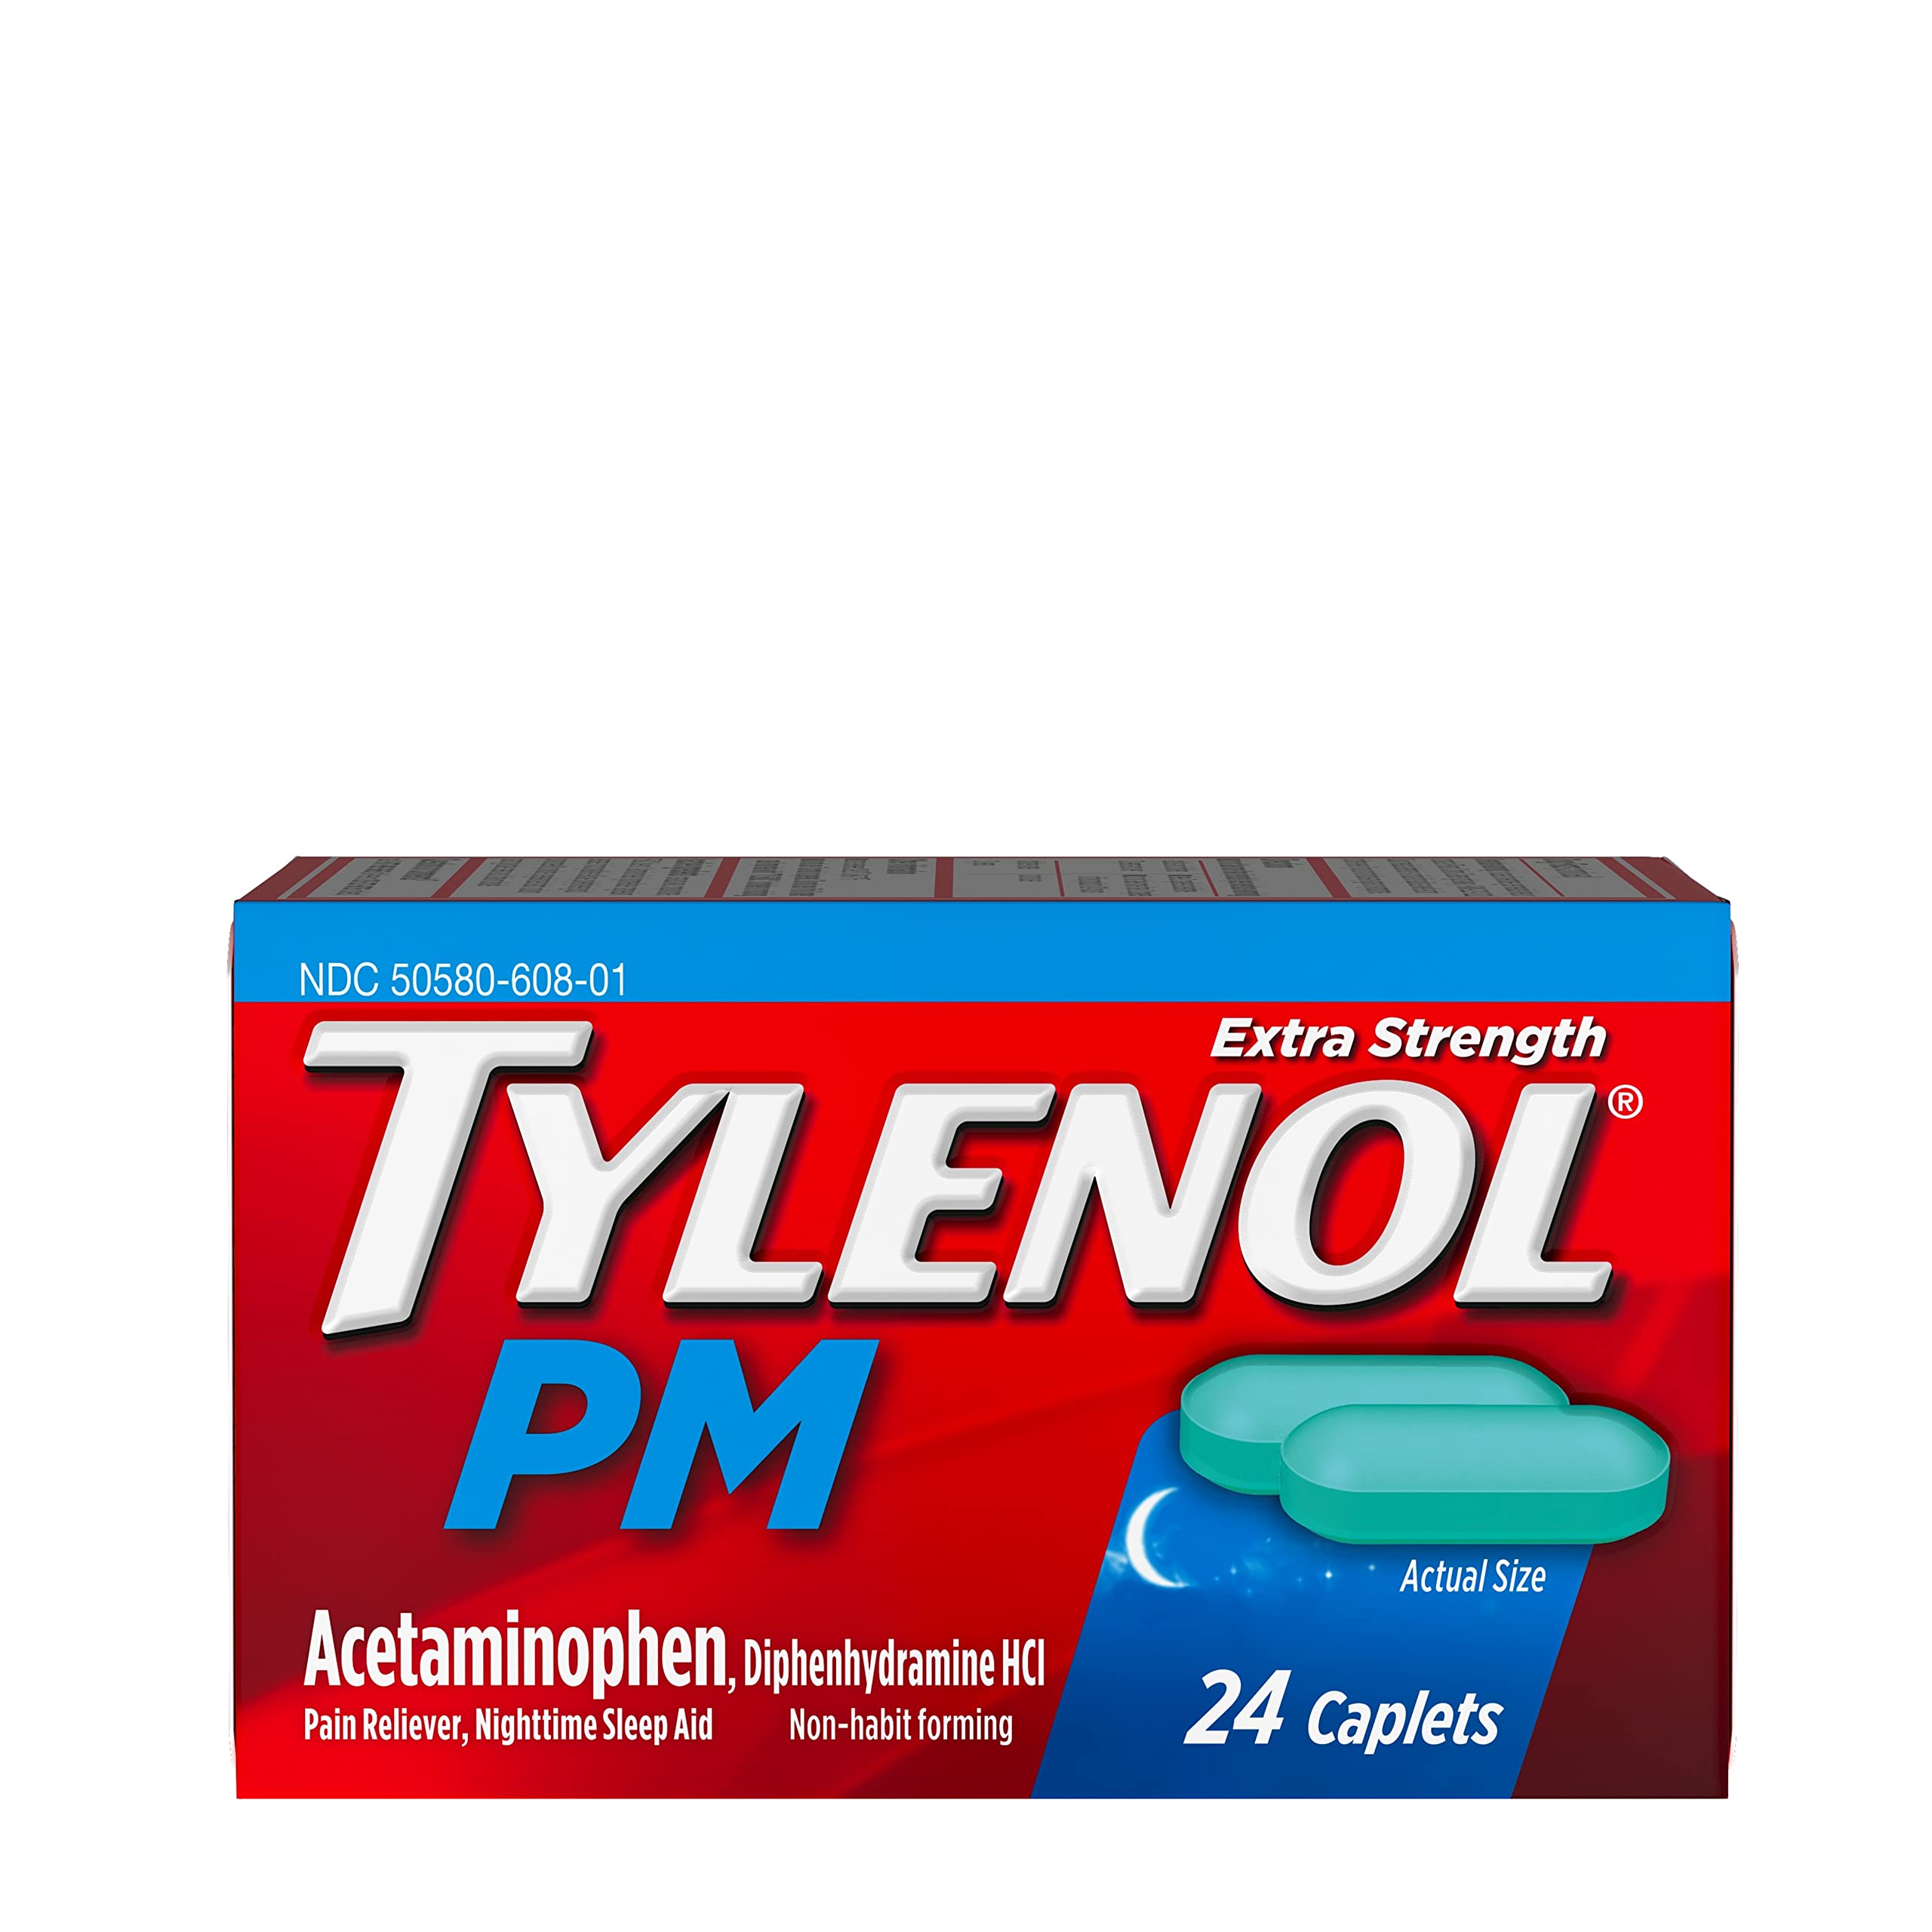 24-Count Tylenol PM Extra Strength Pain Reliever & Sleep Aid Caplets (500 mg Acetaminophen) $2.79 w/ S&S + Free Shipping w/ Prime or on $35+